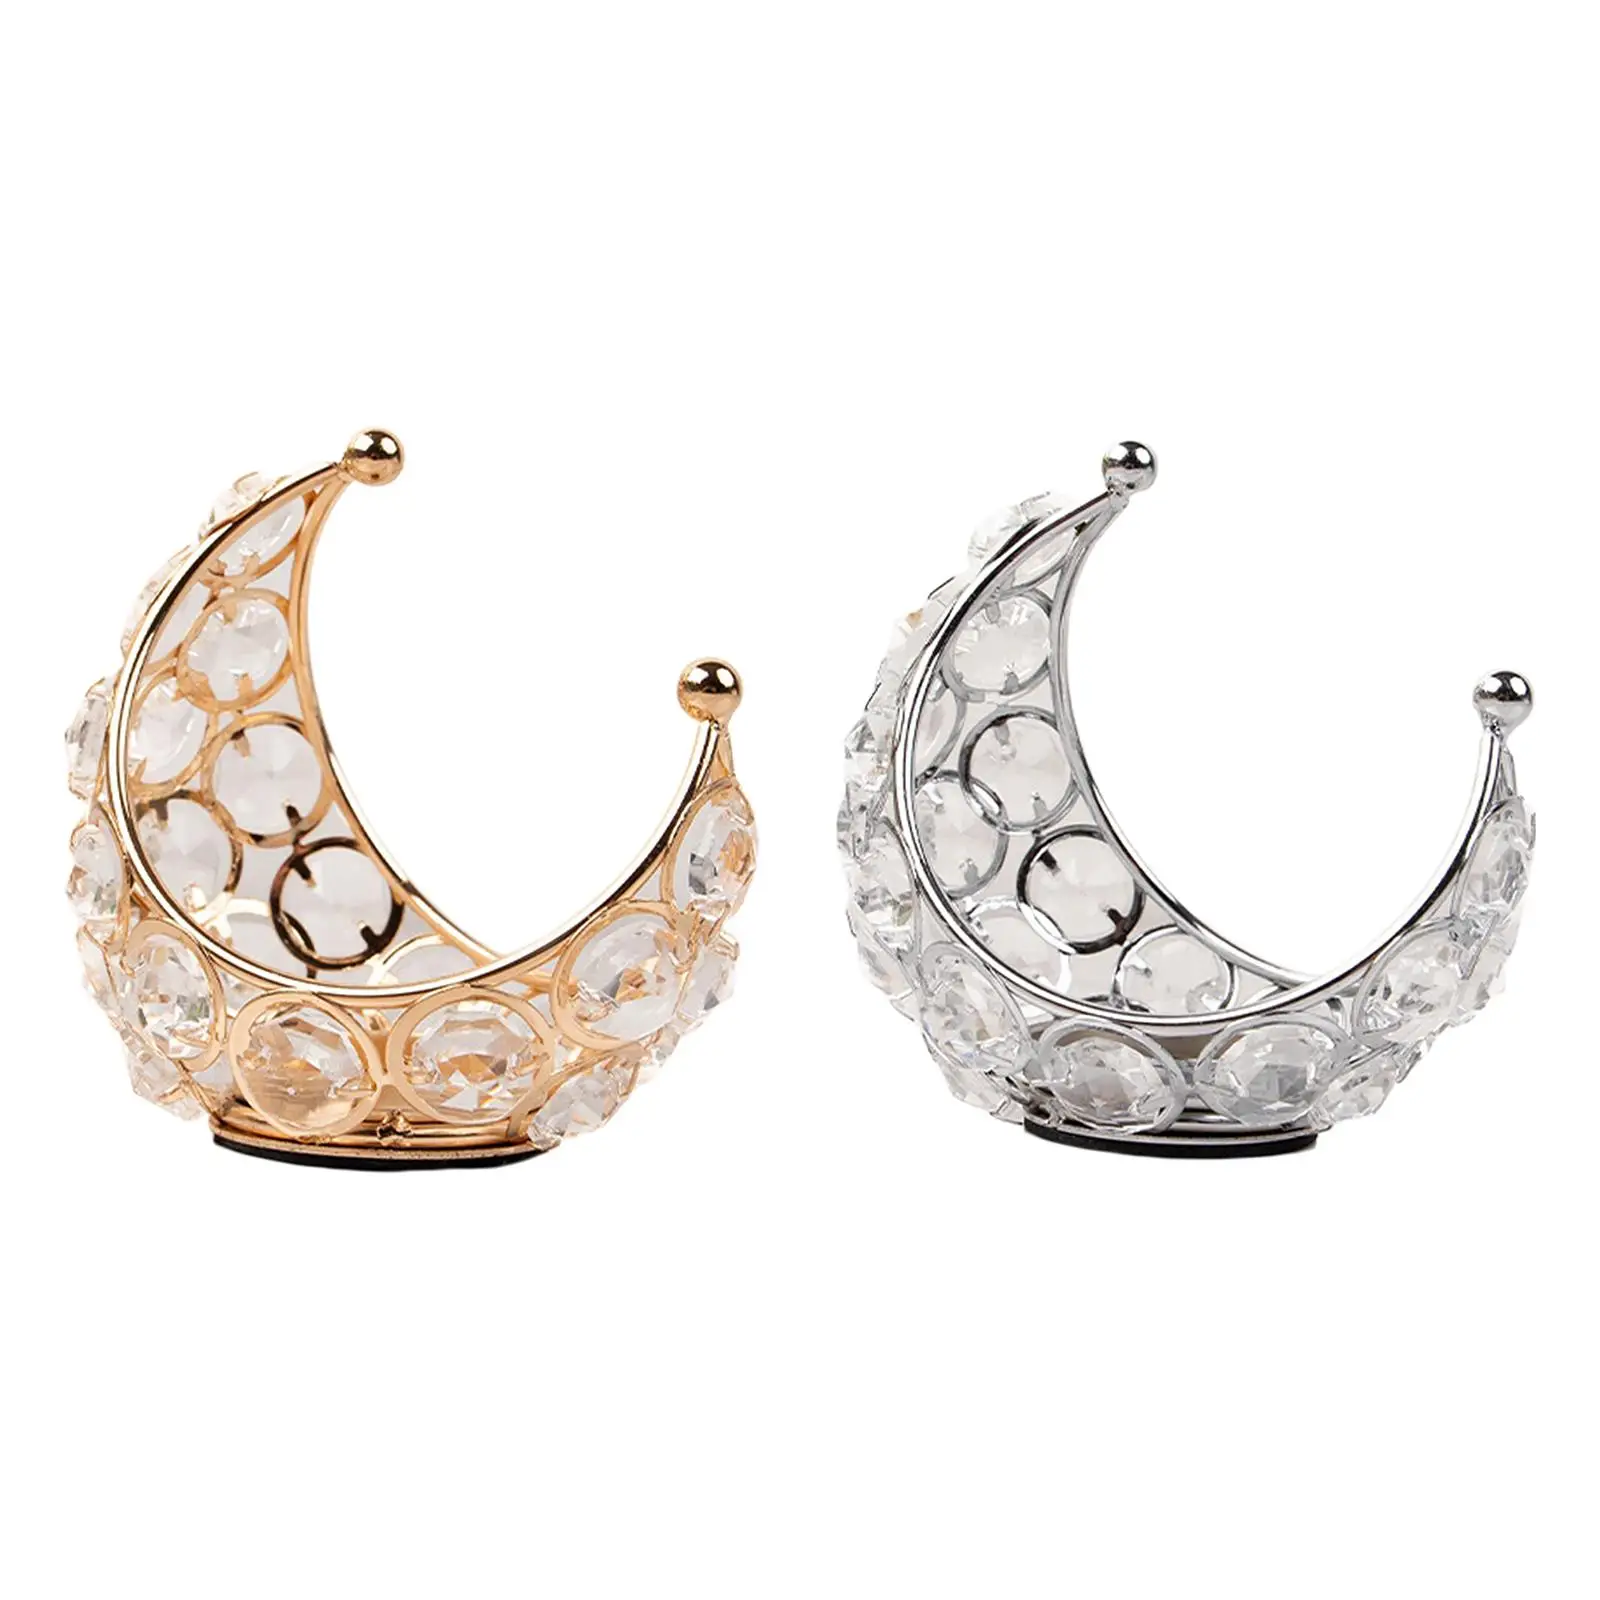 Moon Candle Holder Iron Candlestick Elegant Tealight Candle Holder Candle Stand for Christmas Dining Table Desktop Bedroom Decor